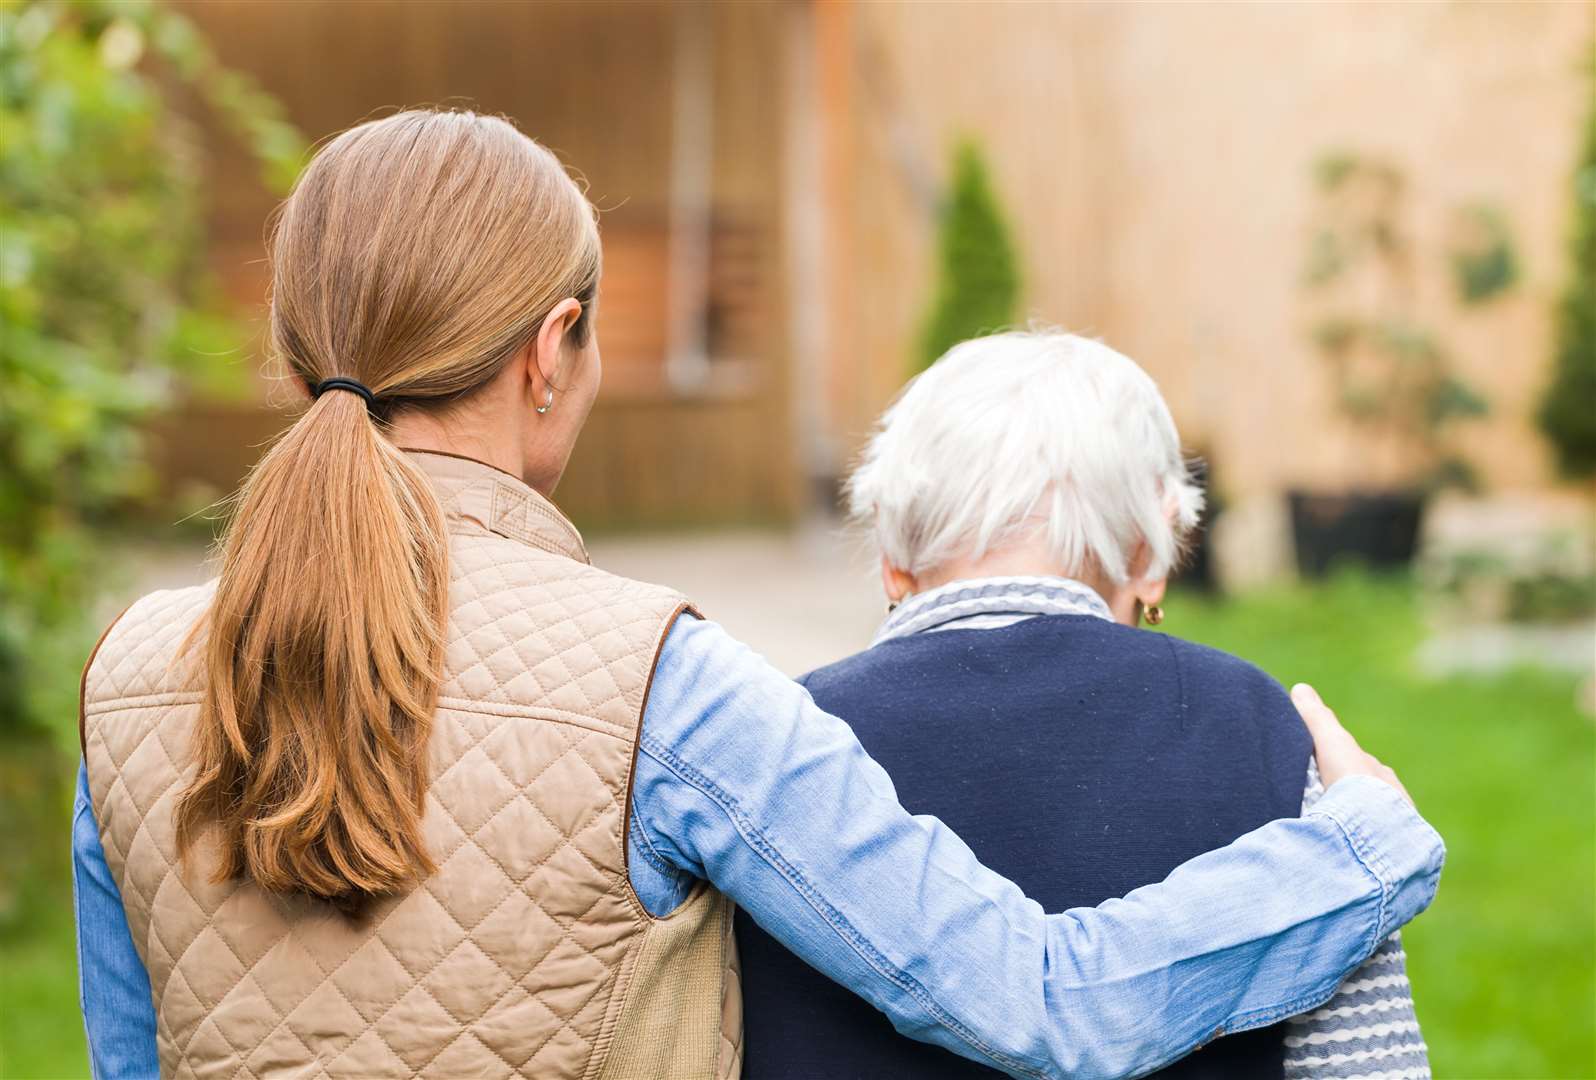 Supporting those who might be lonely can have a positive impact on their health.